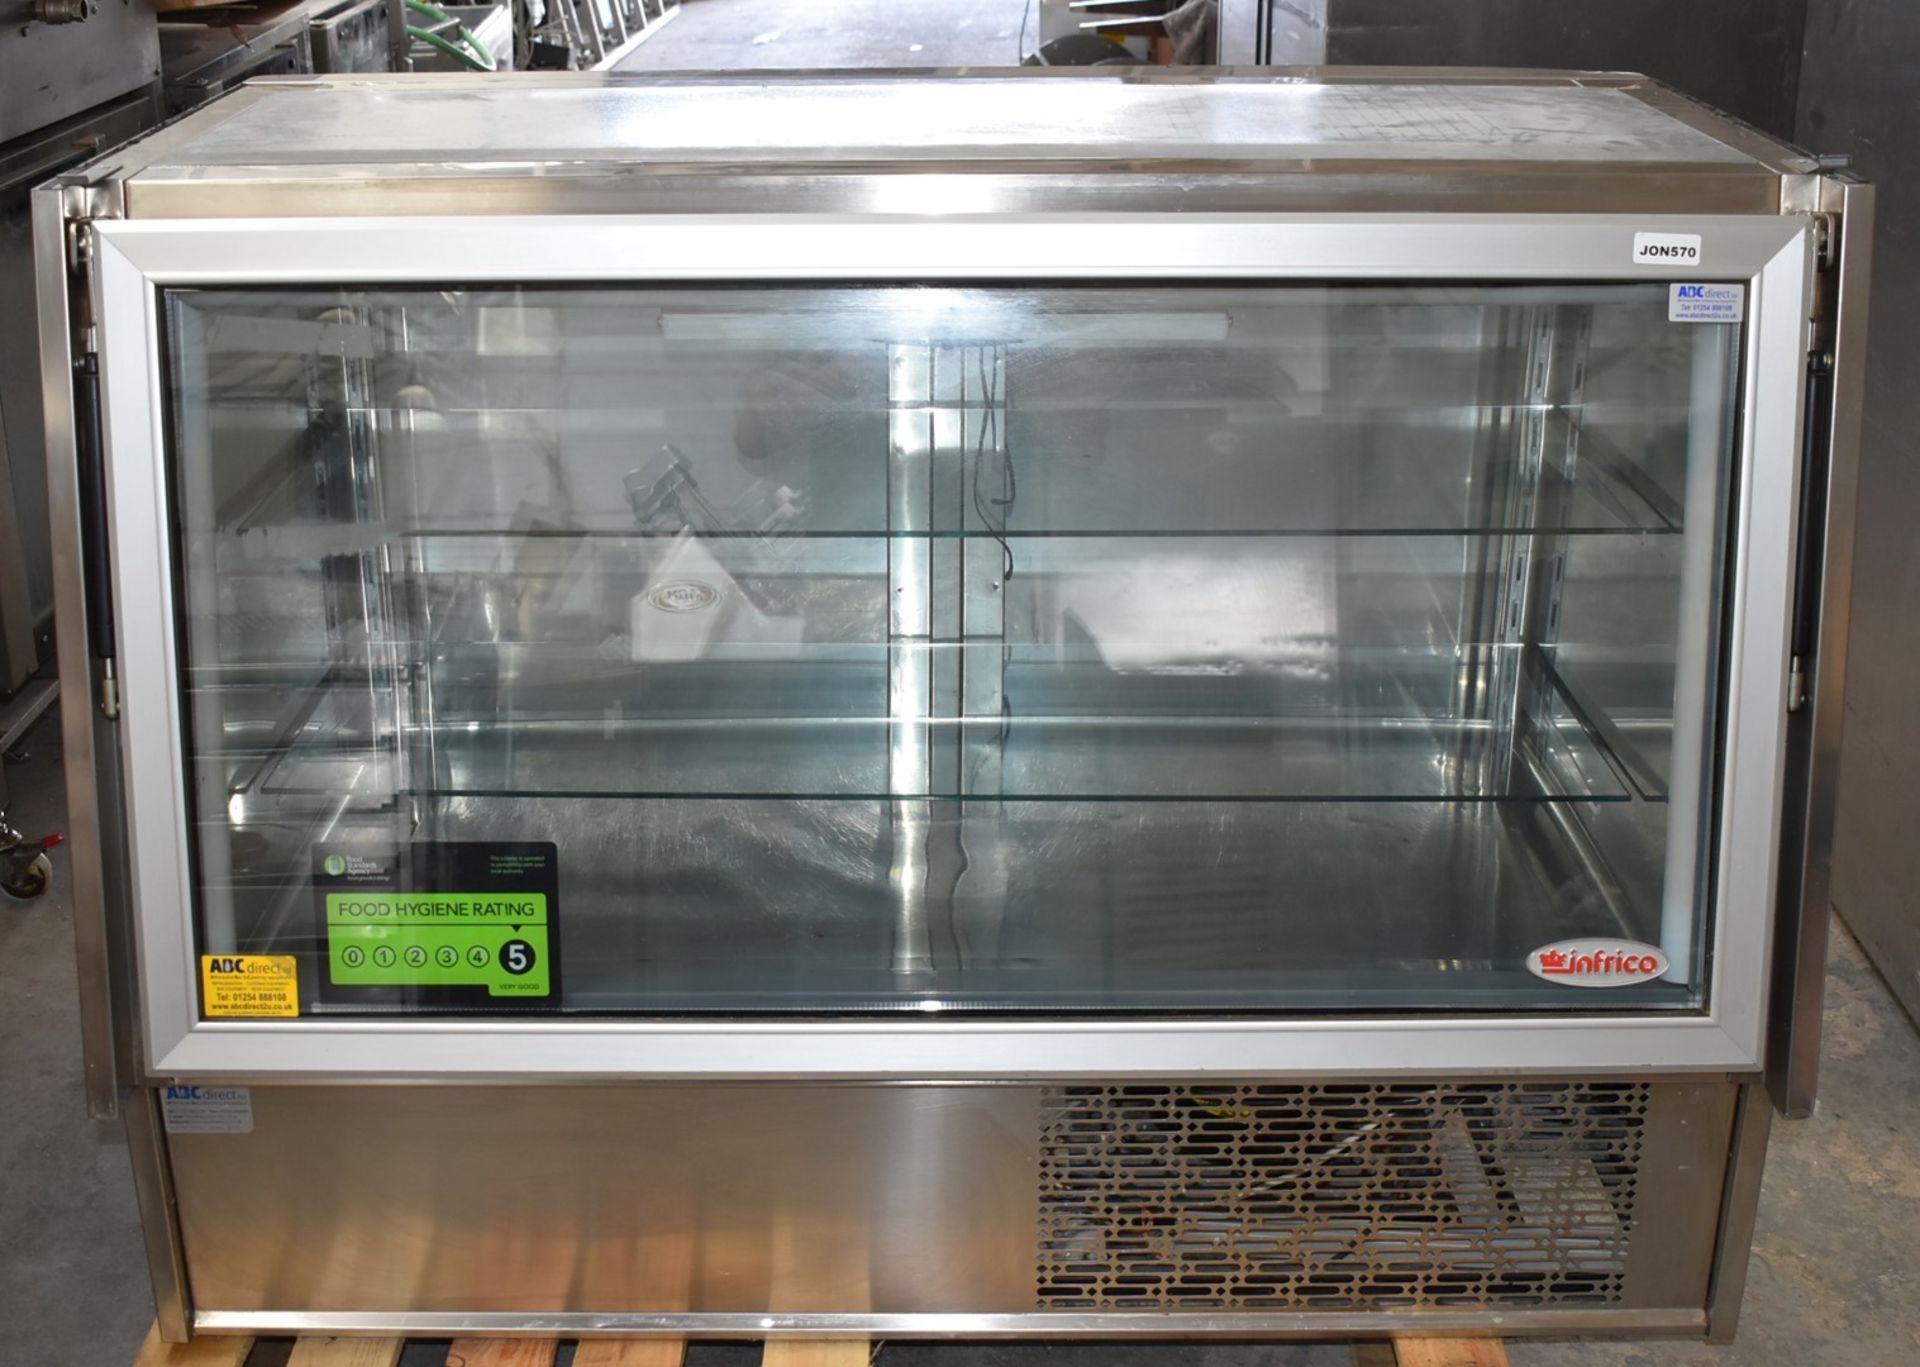 1 x Infrico 1.4m Refrigerated Vision Counter For Takeaways, Sandwich Shops or Cafes - RRP £3,200! - Image 21 of 21